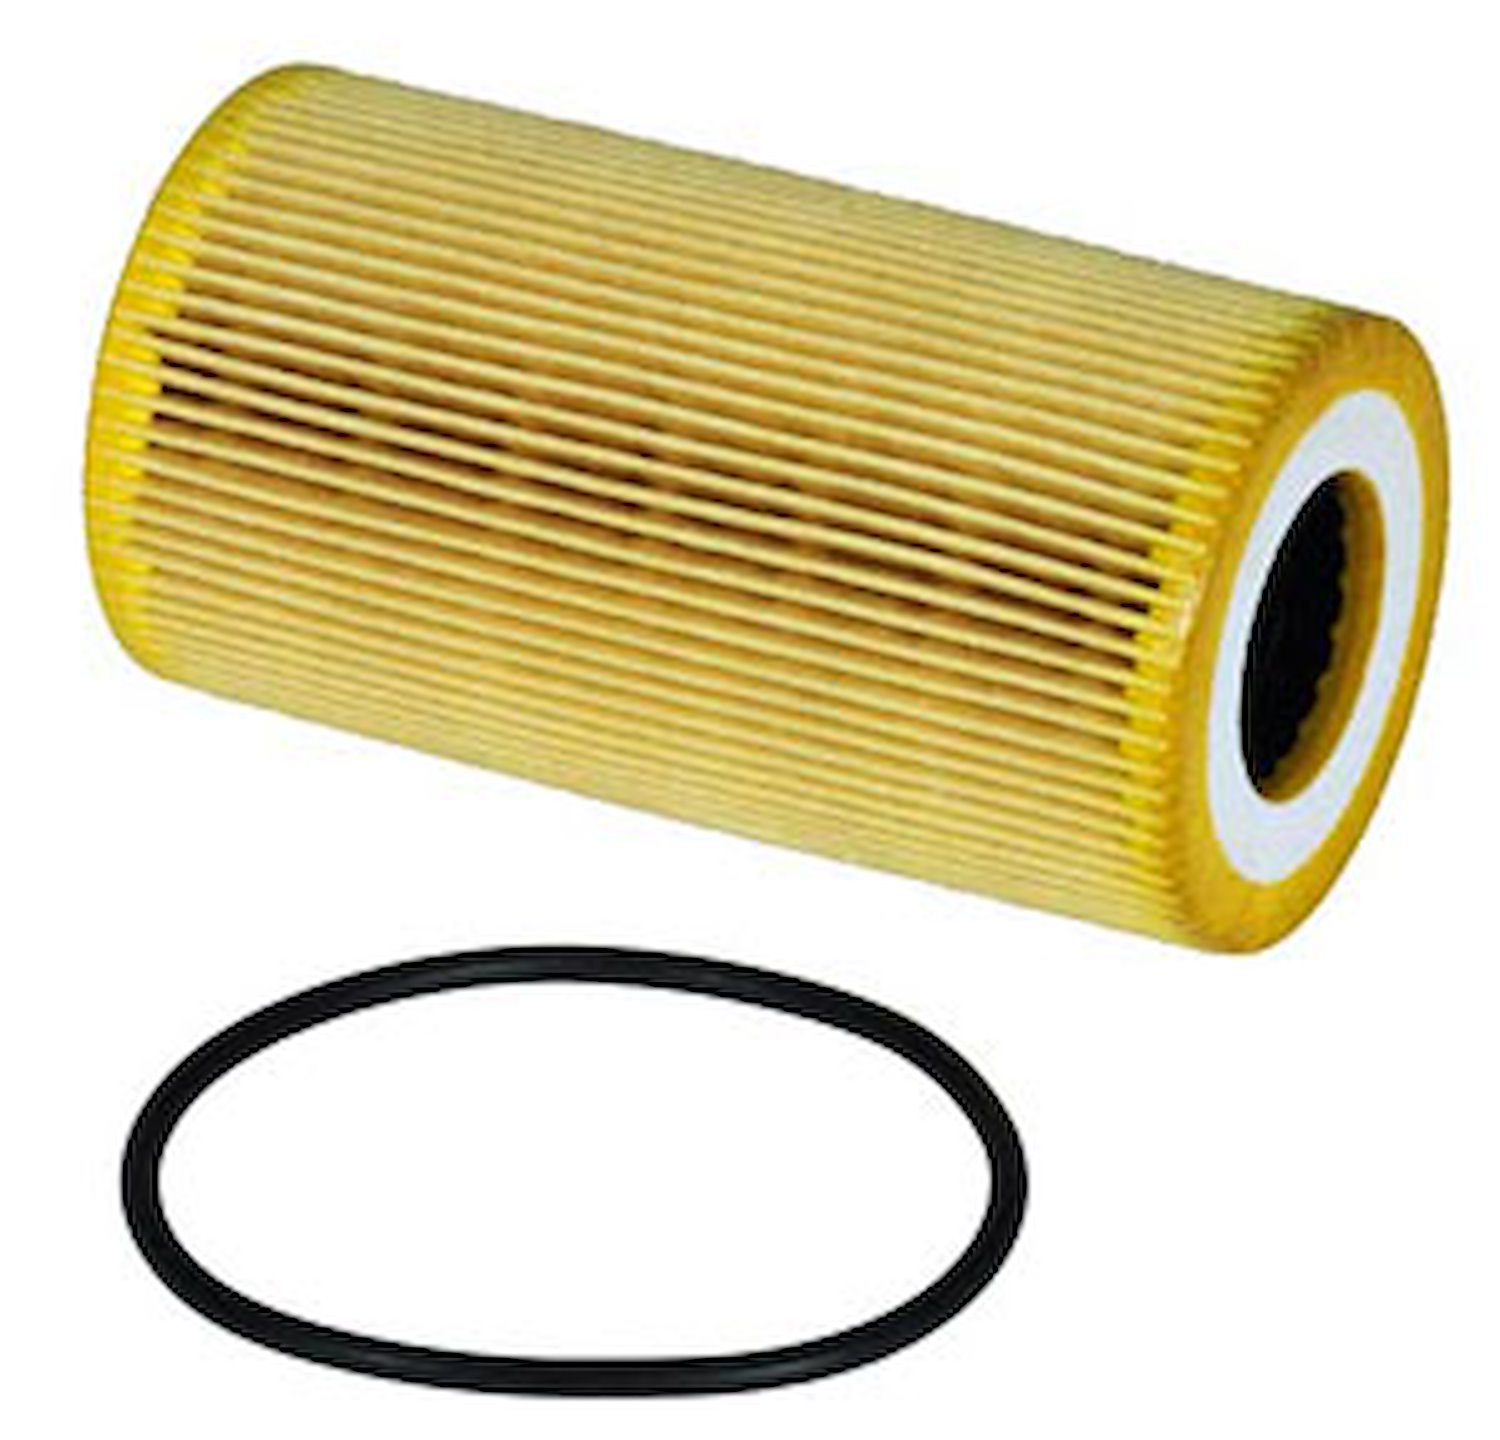 PERFORMANCE GOLD OIL FILTER